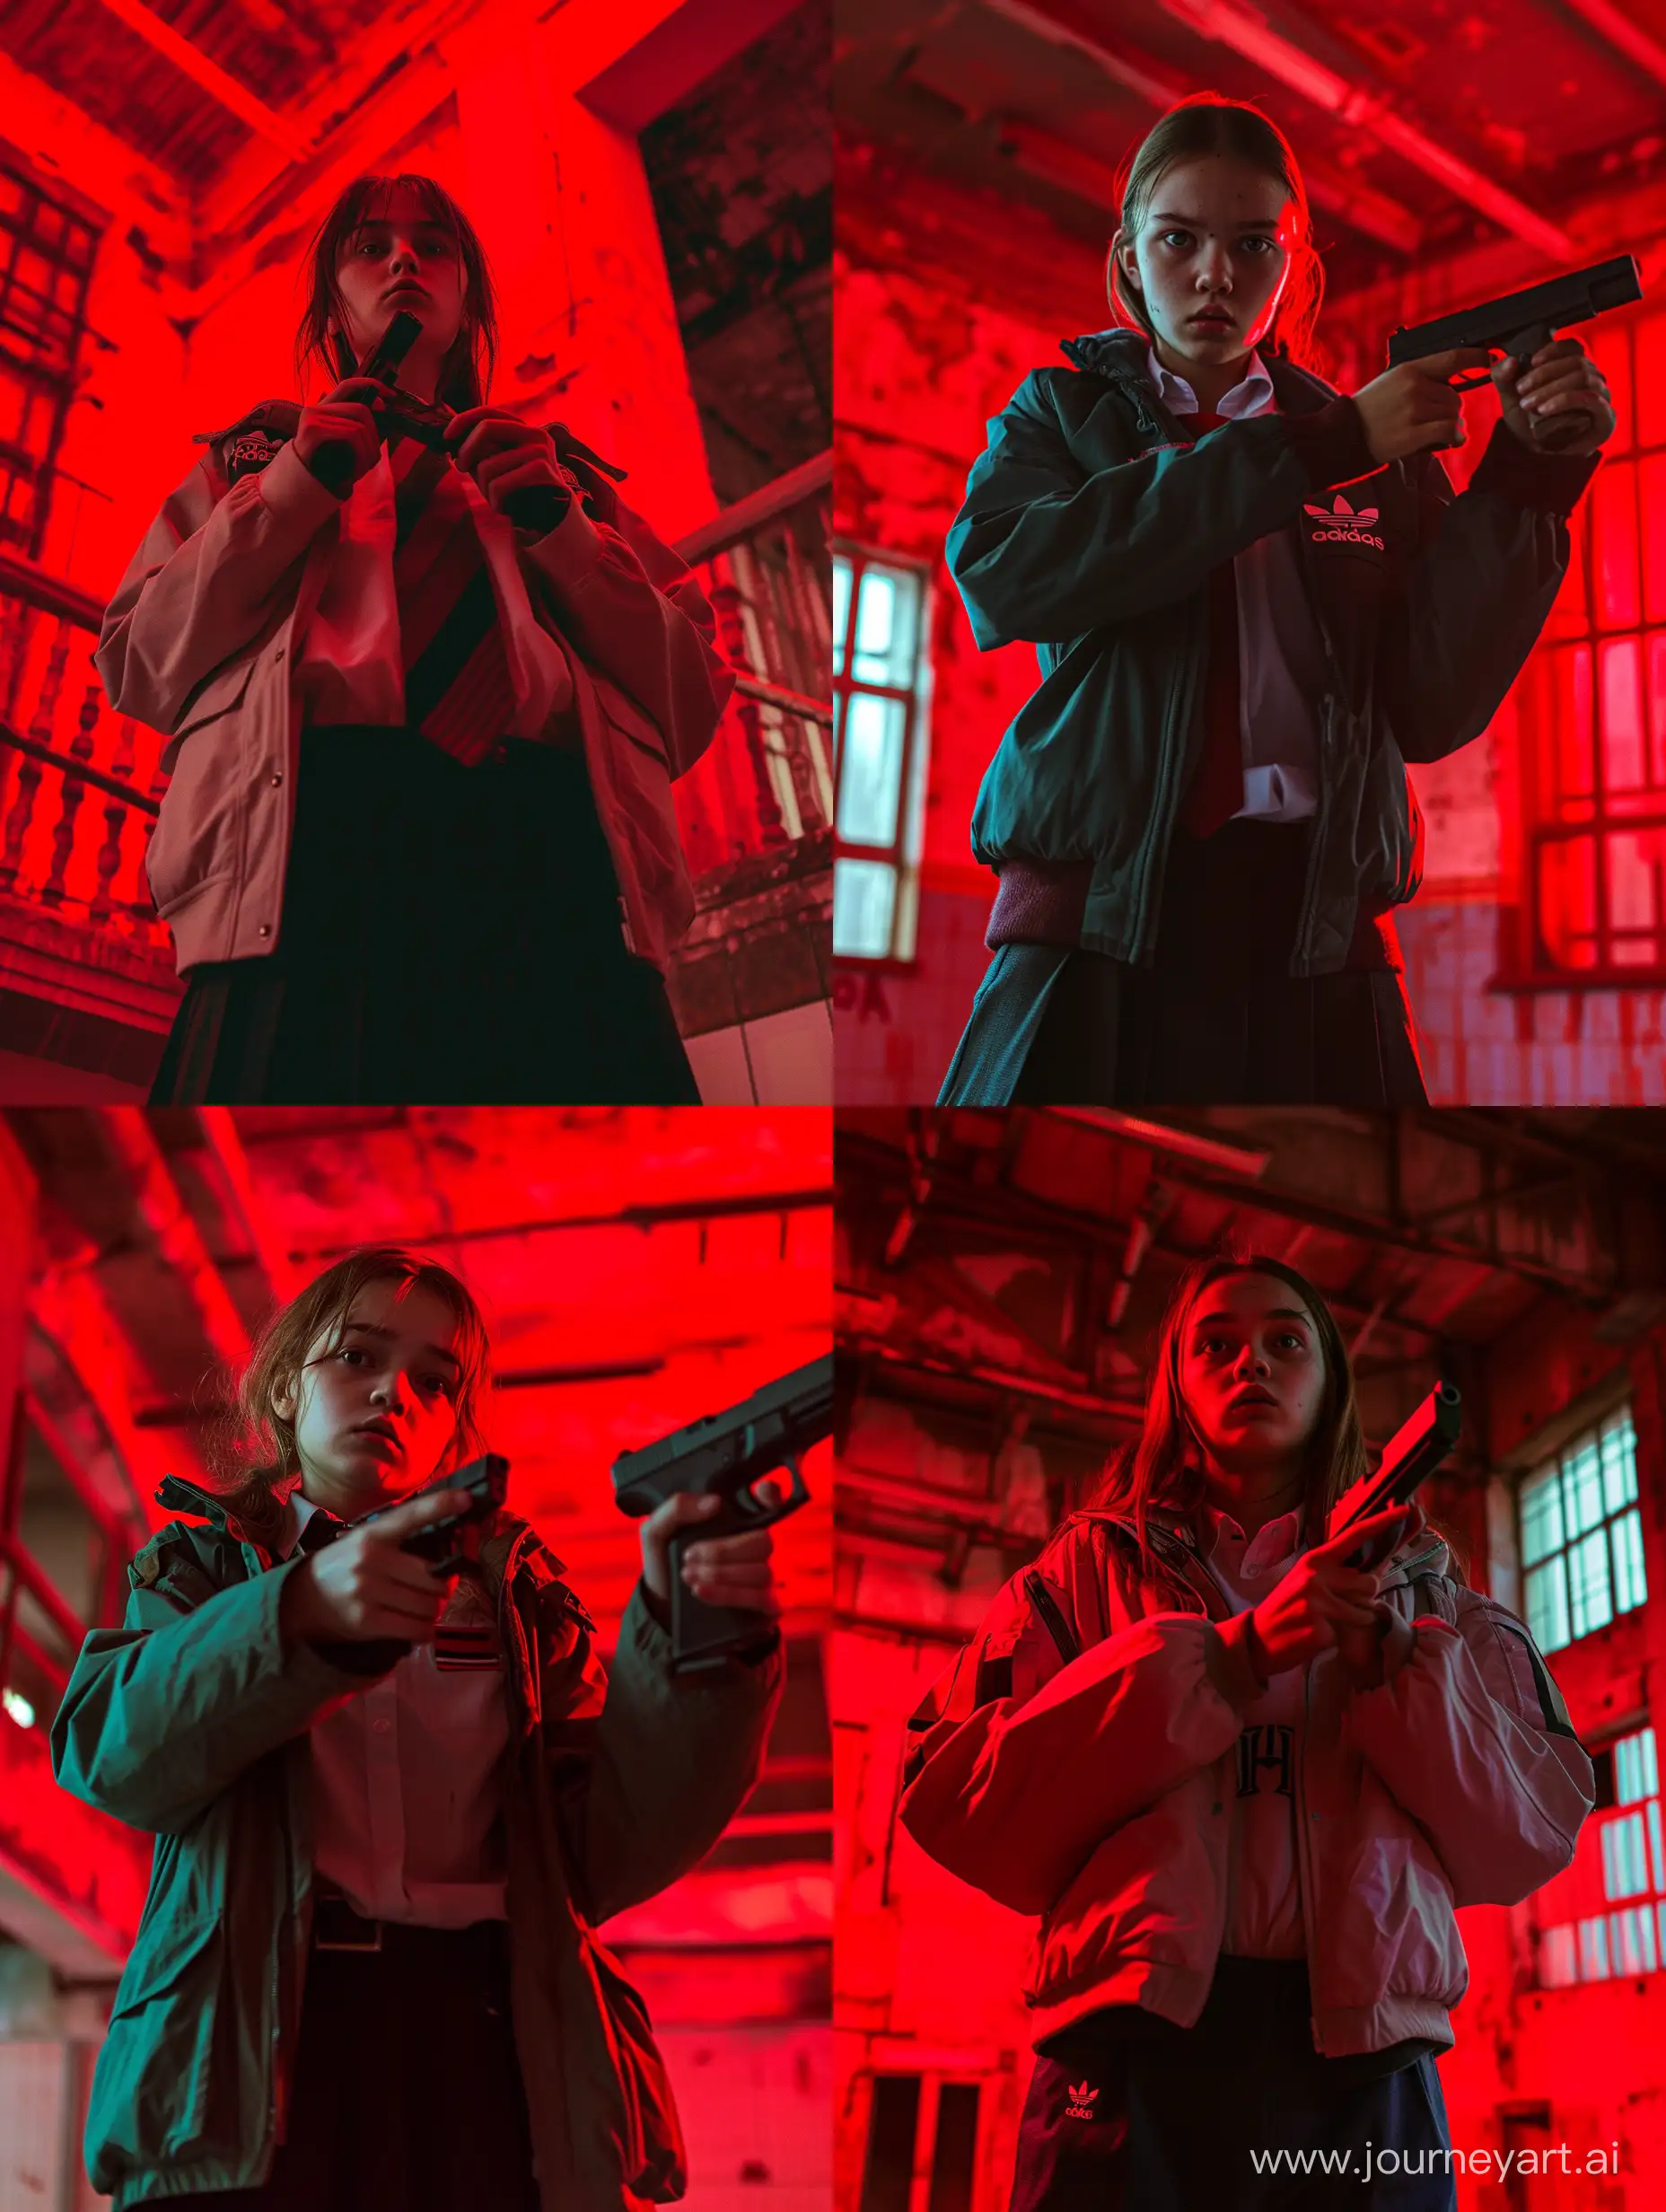 a russian girl of 16-17 years old in a school uniform and an adidas windbreaker stands tall with a gun in his hands and an anxious expression on his face, she is in an abandoned school, red creepy lighting